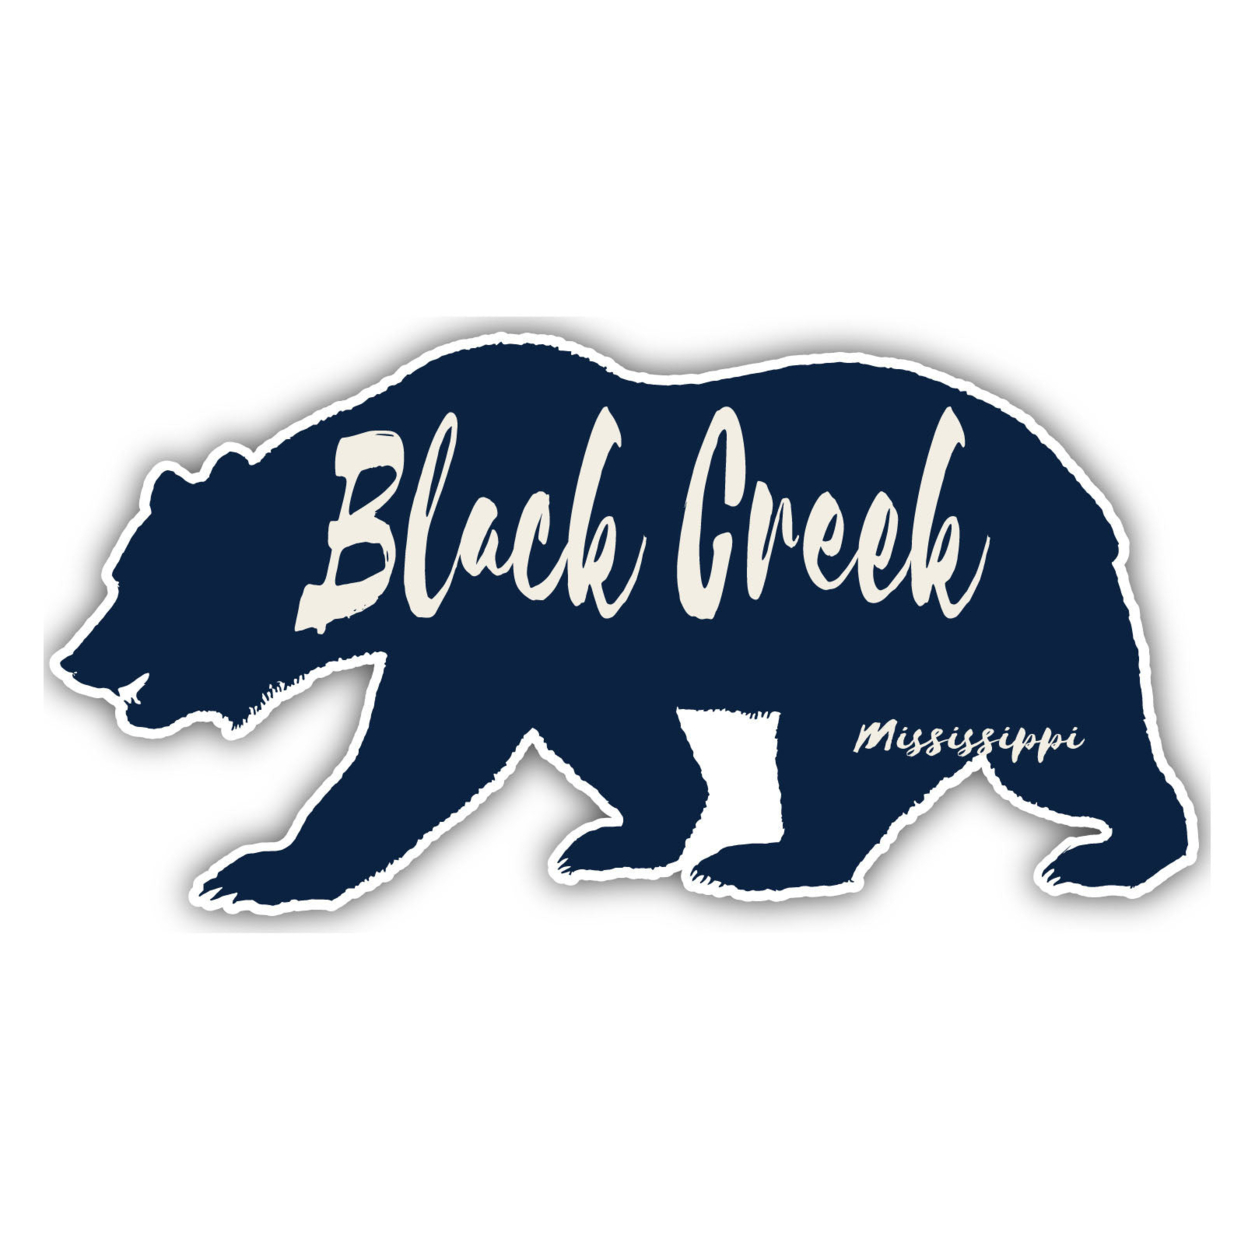 Black Creek Mississippi Souvenir Decorative Stickers (Choose Theme And Size) - 4-Pack, 10-Inch, Bear